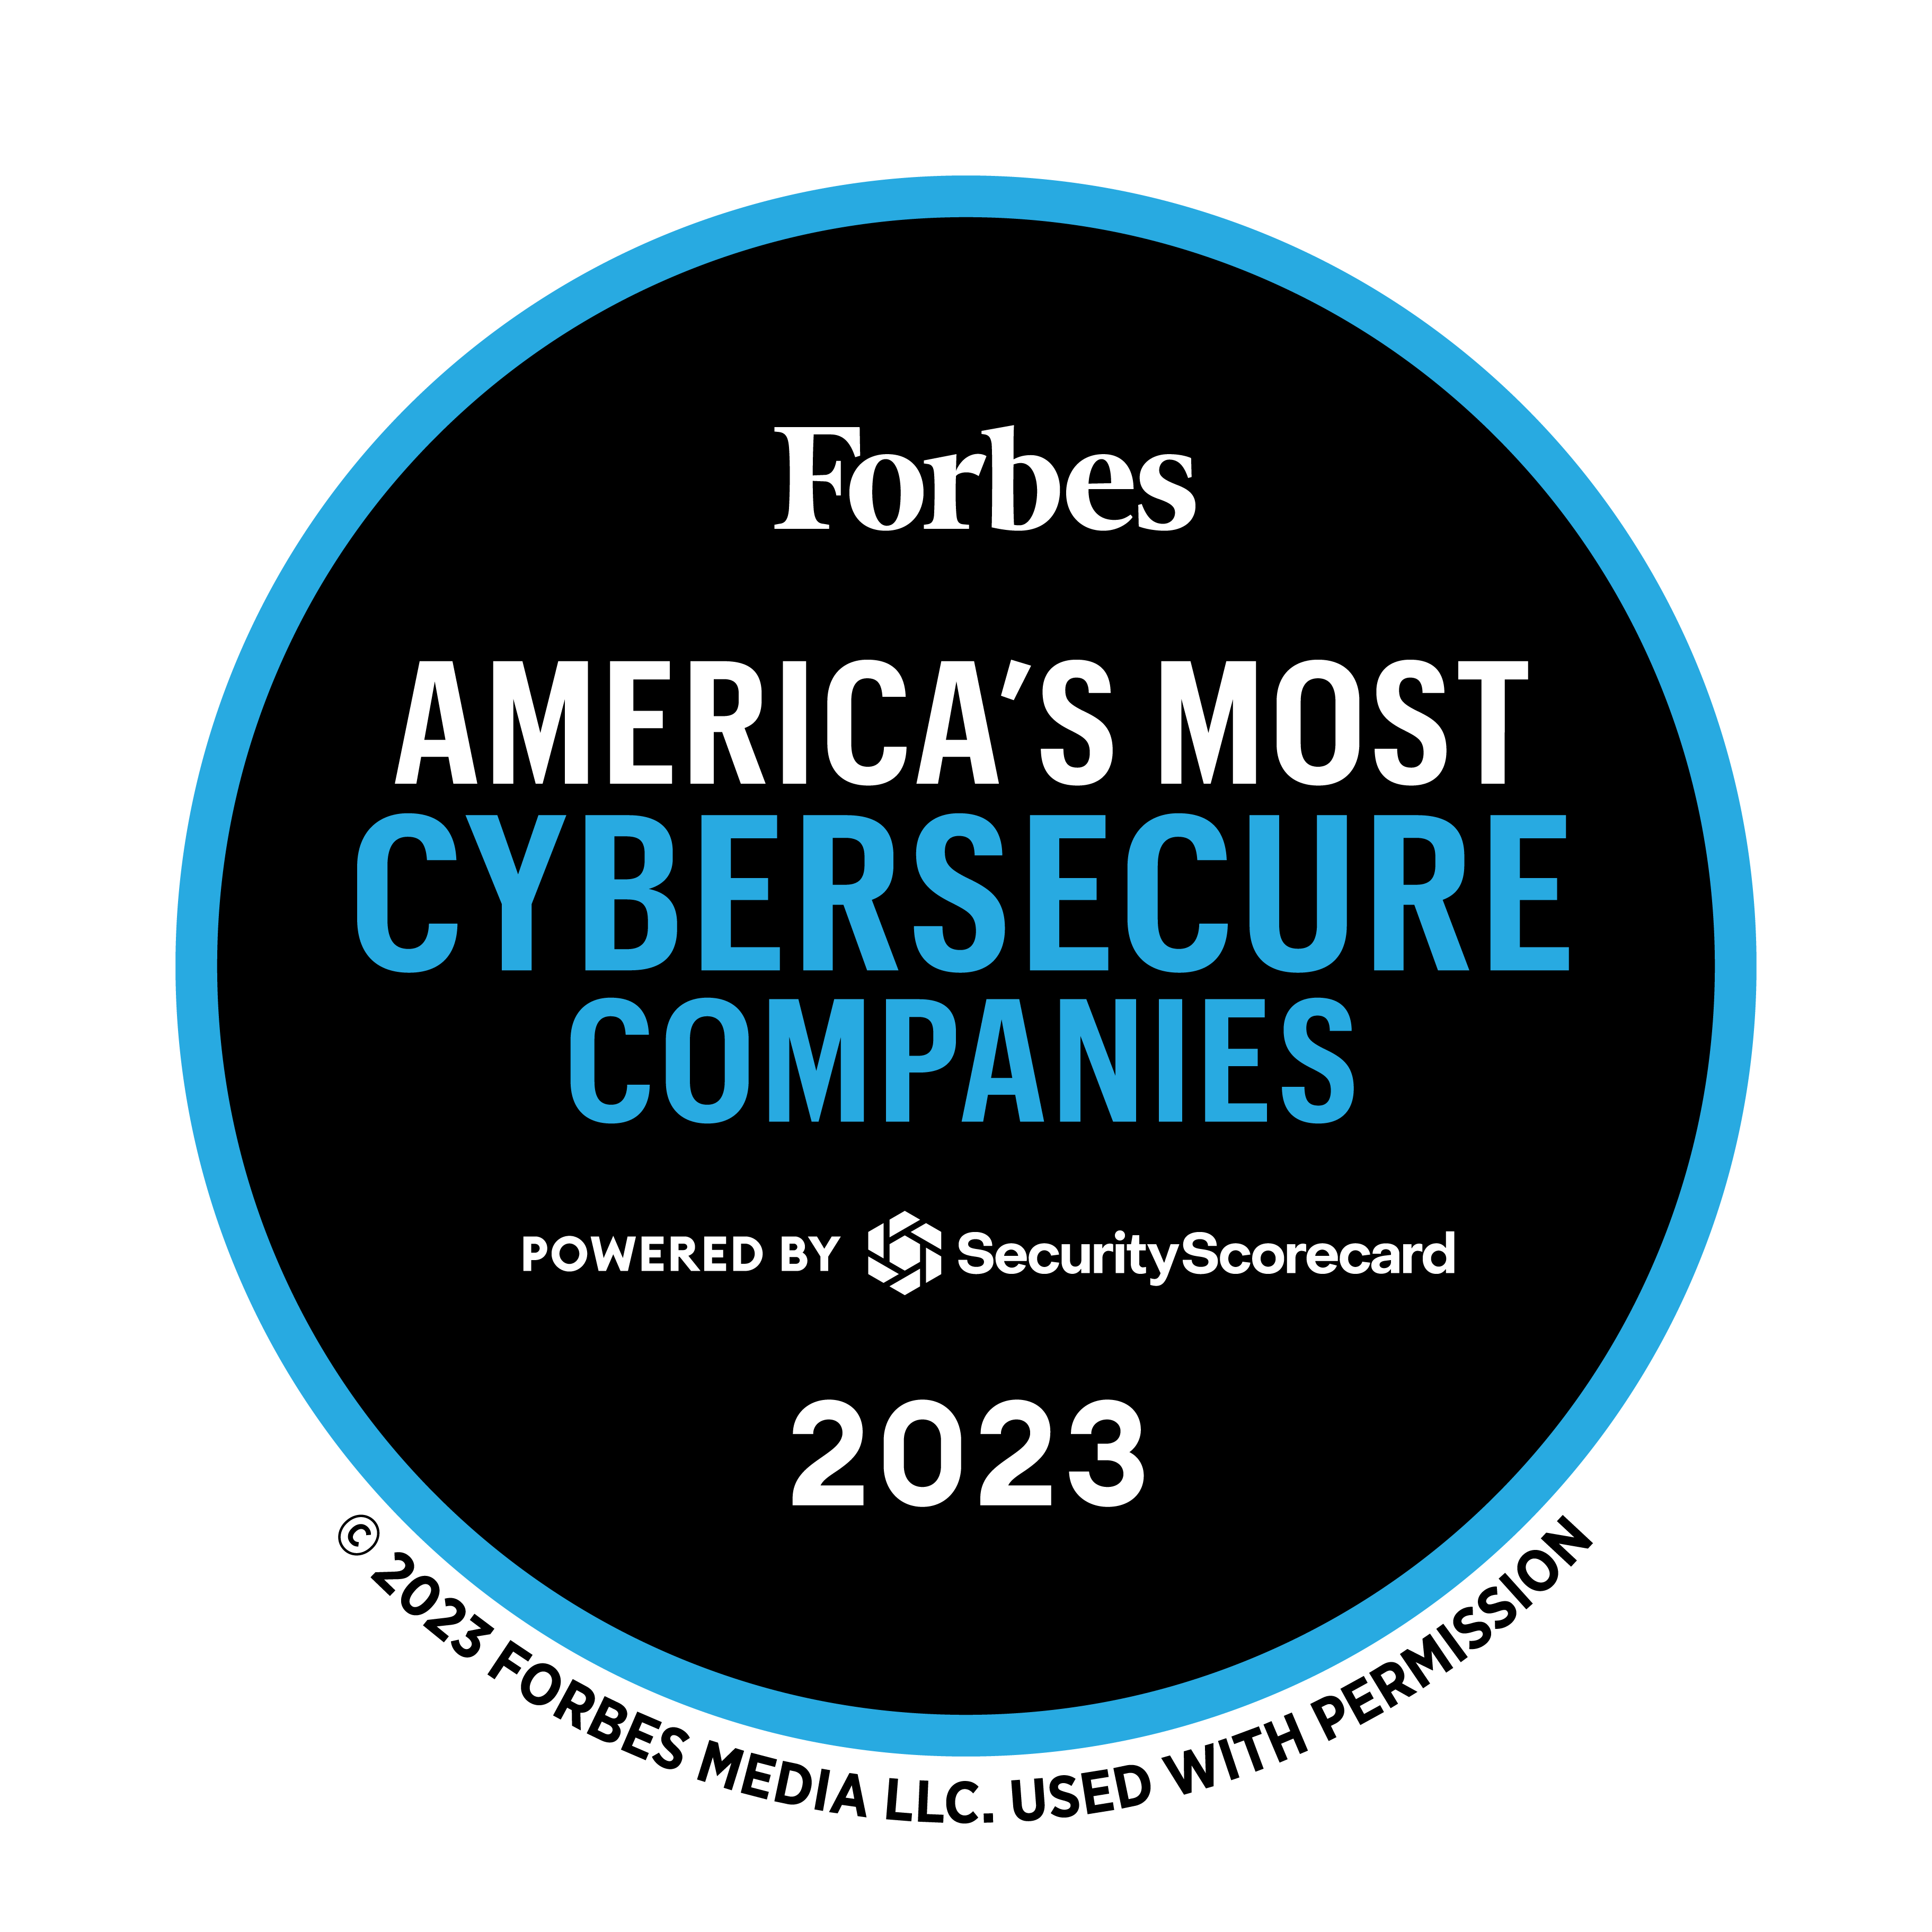 Americas Most Cyber Secure Companies 2023